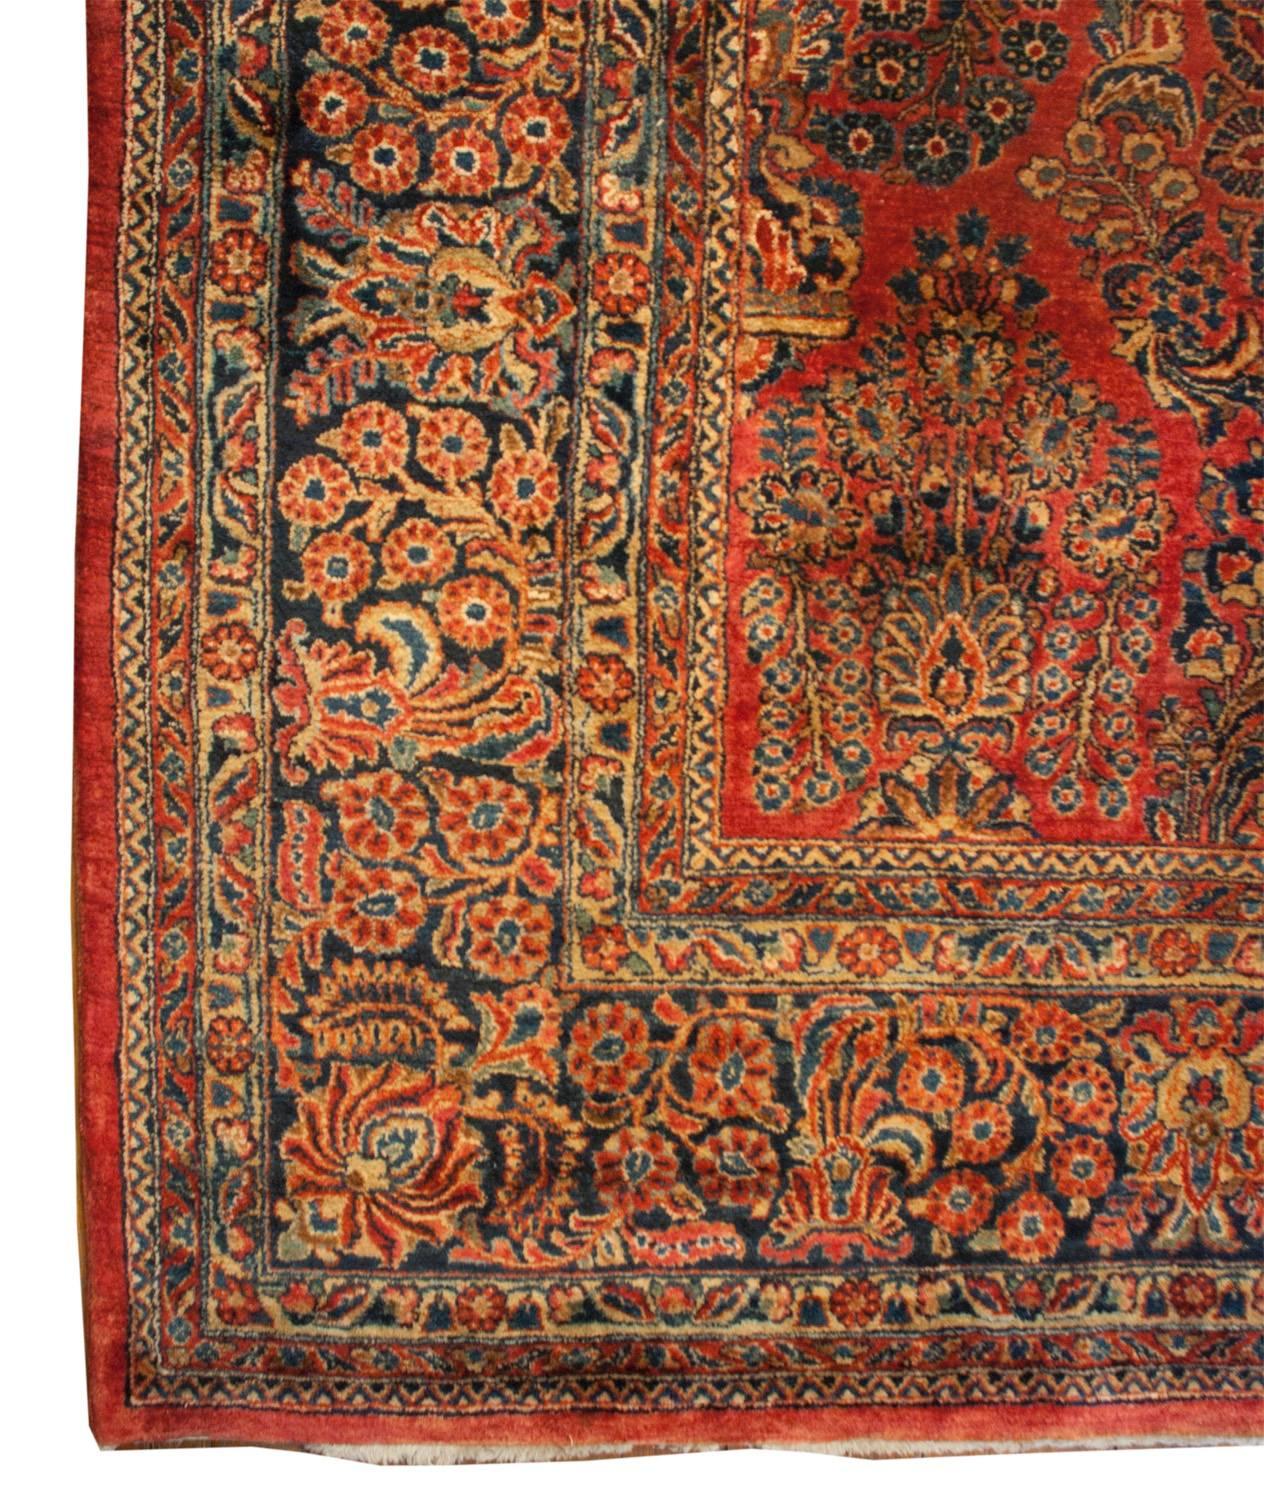 An early 20th century Persian Sarouk rug with an amazing all-over pattern of myriad flowering branches and trees woven in indigo and natural undyed wool, on a rich light cranberry background. The border is woven similarly in pattern to the field,